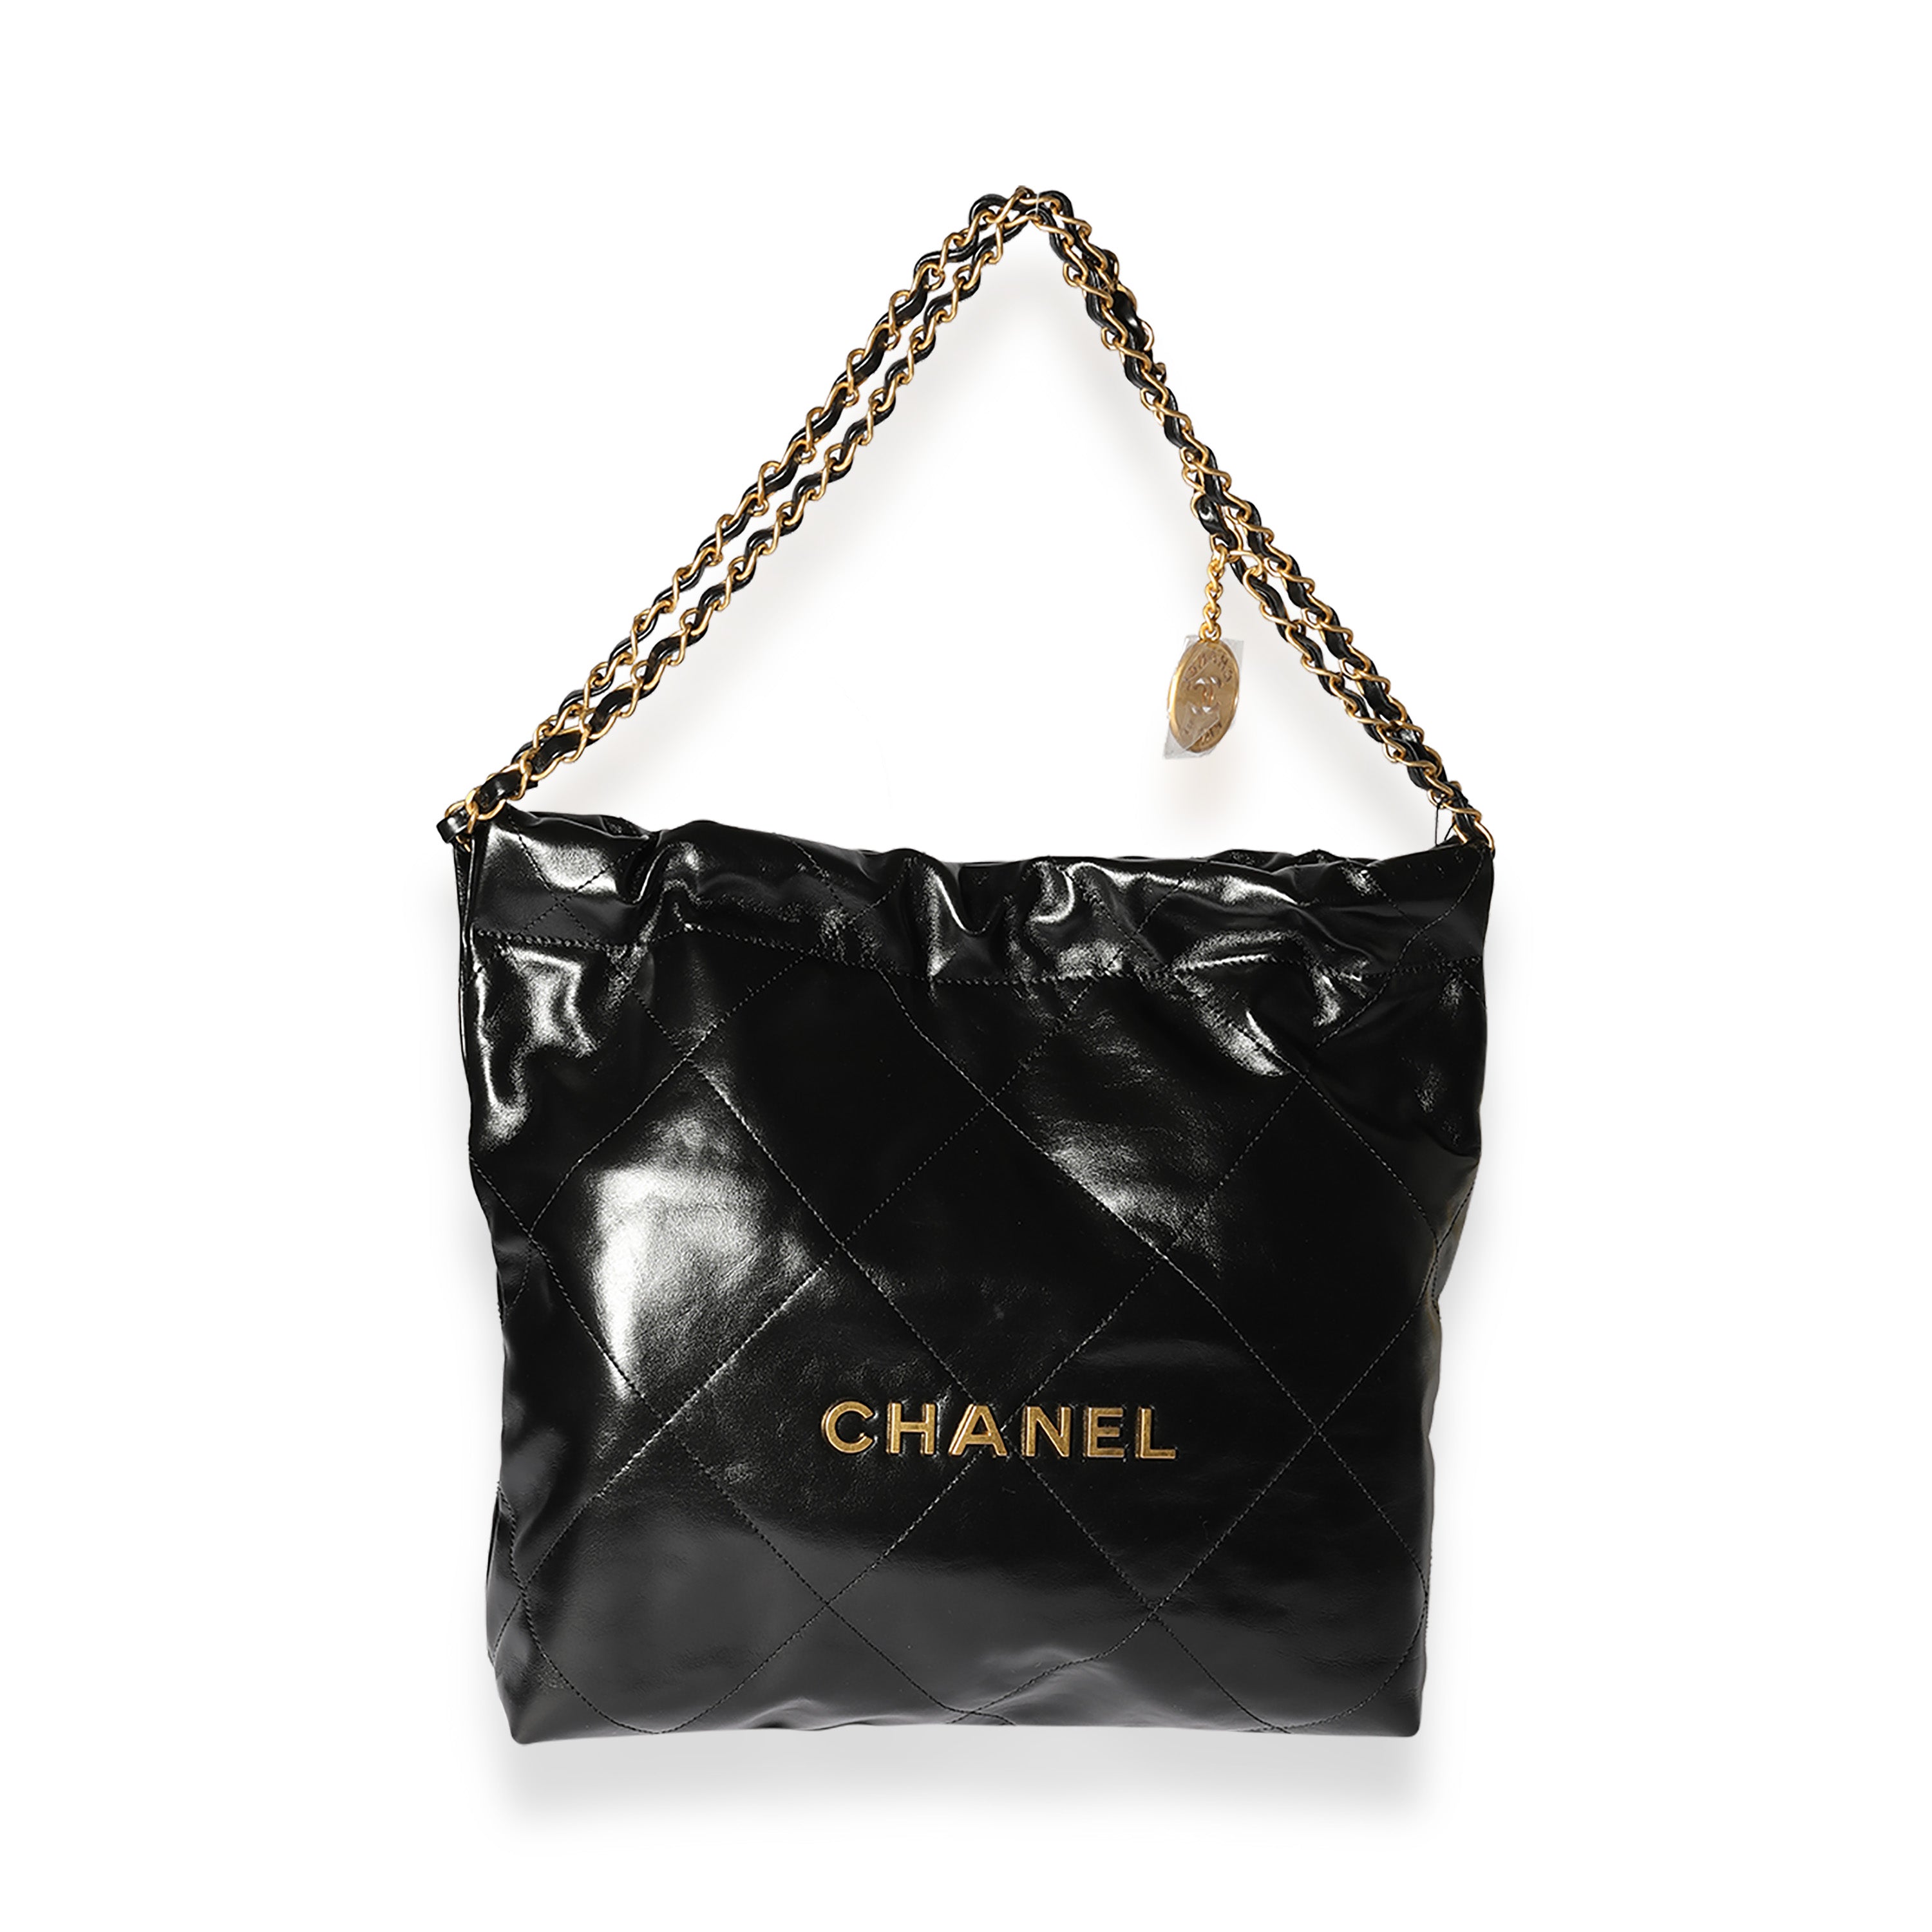 Chanel 22 leather mini bag Chanel Black in Leather - 33728664